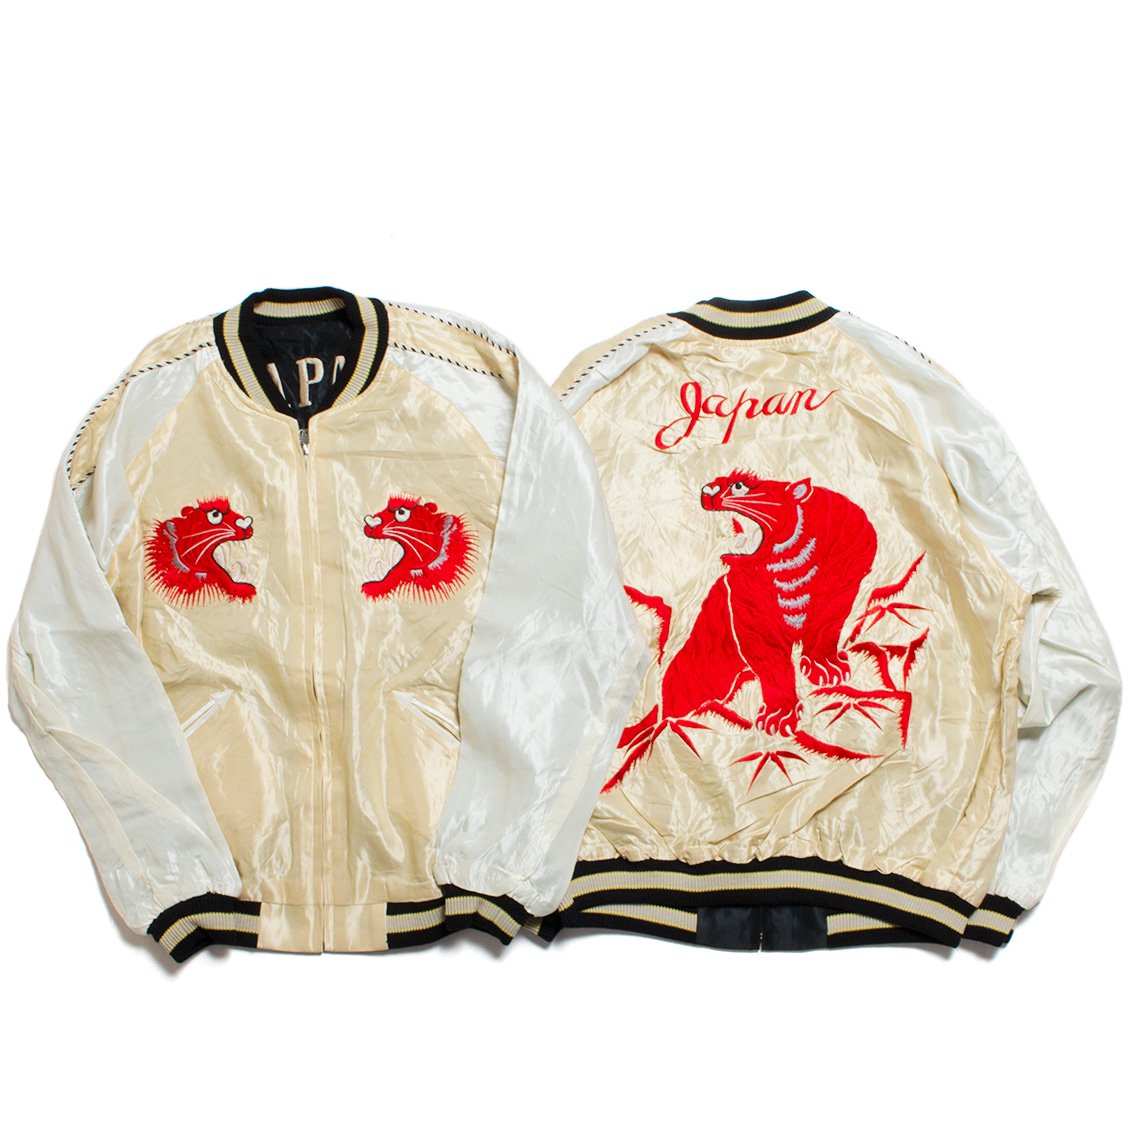 TAILOR TOYO テーラー東洋] Early 1950s Mid 1950s Souvenir Jacket スカジャン RED  TIGER × GOLD DRAGON HARTLEY